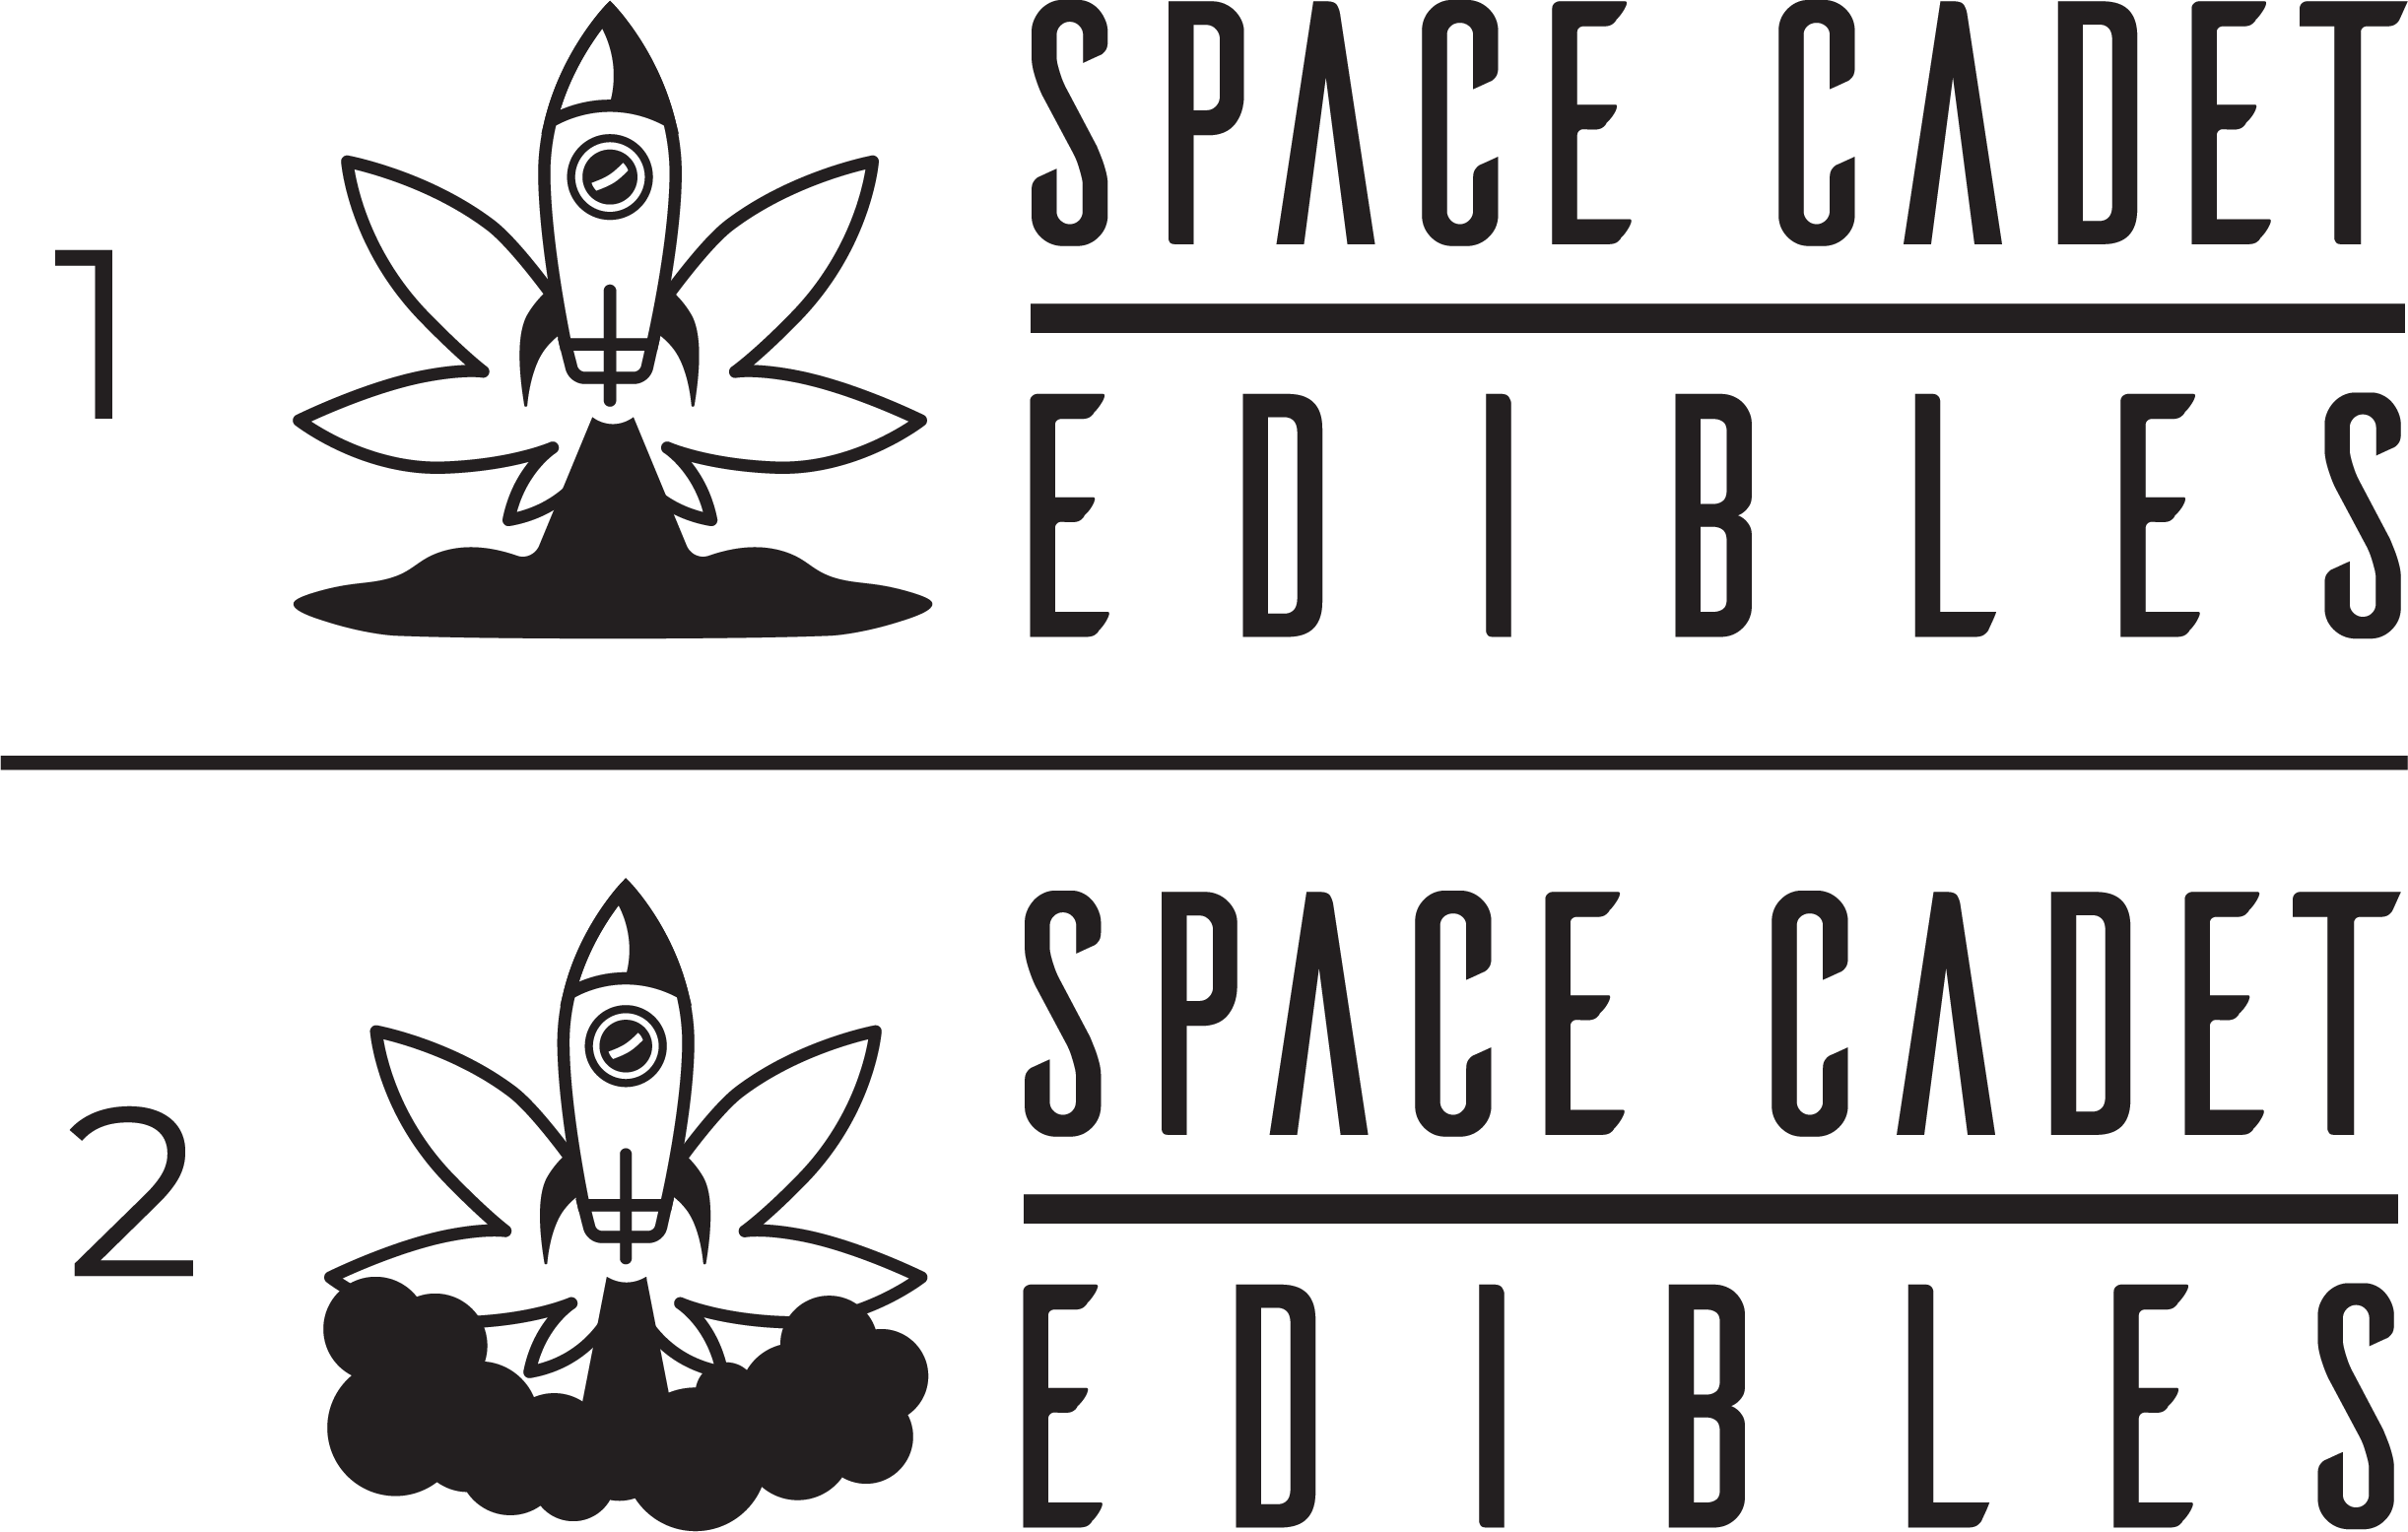 Both choices for the Space Cadet Edibles Logo